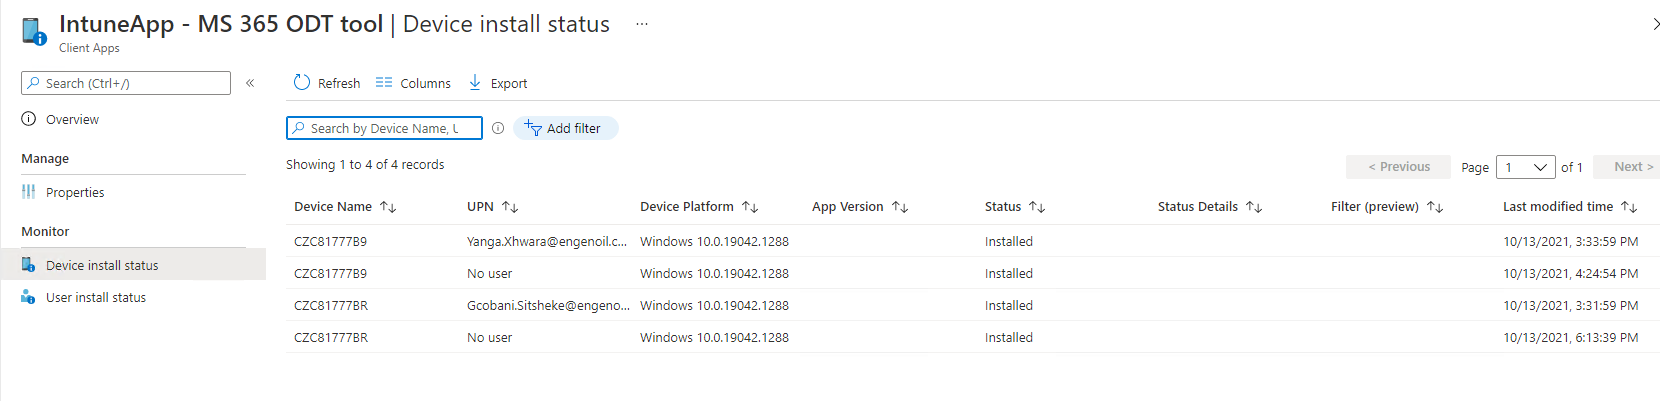 141368-intune-app-ms-odt.png